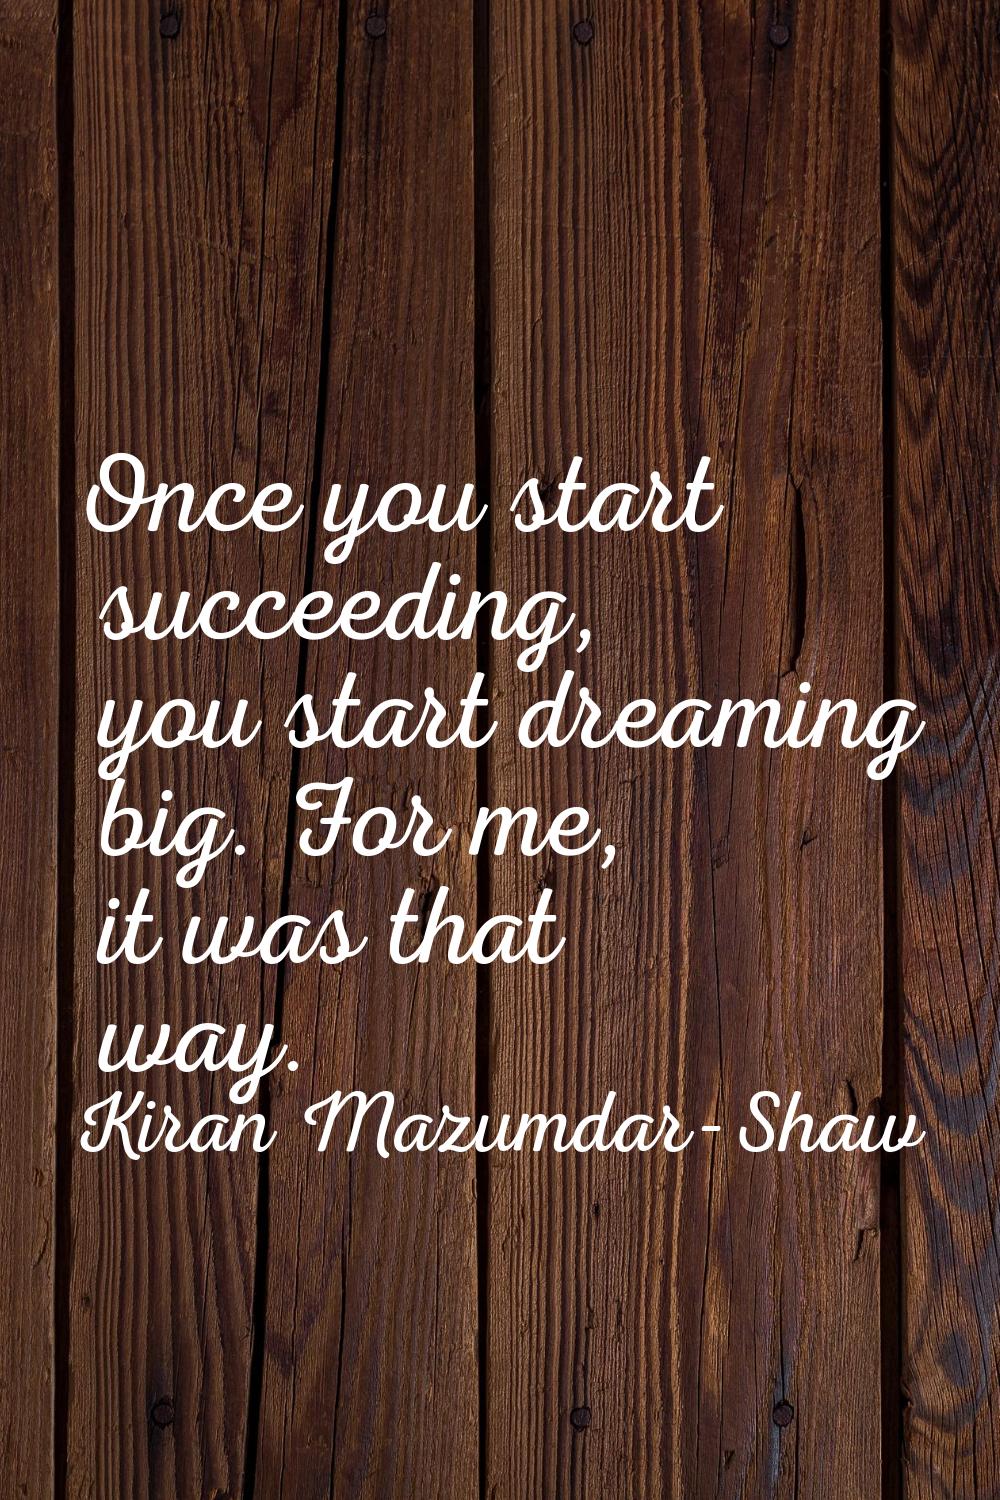 Once you start succeeding, you start dreaming big. For me, it was that way.